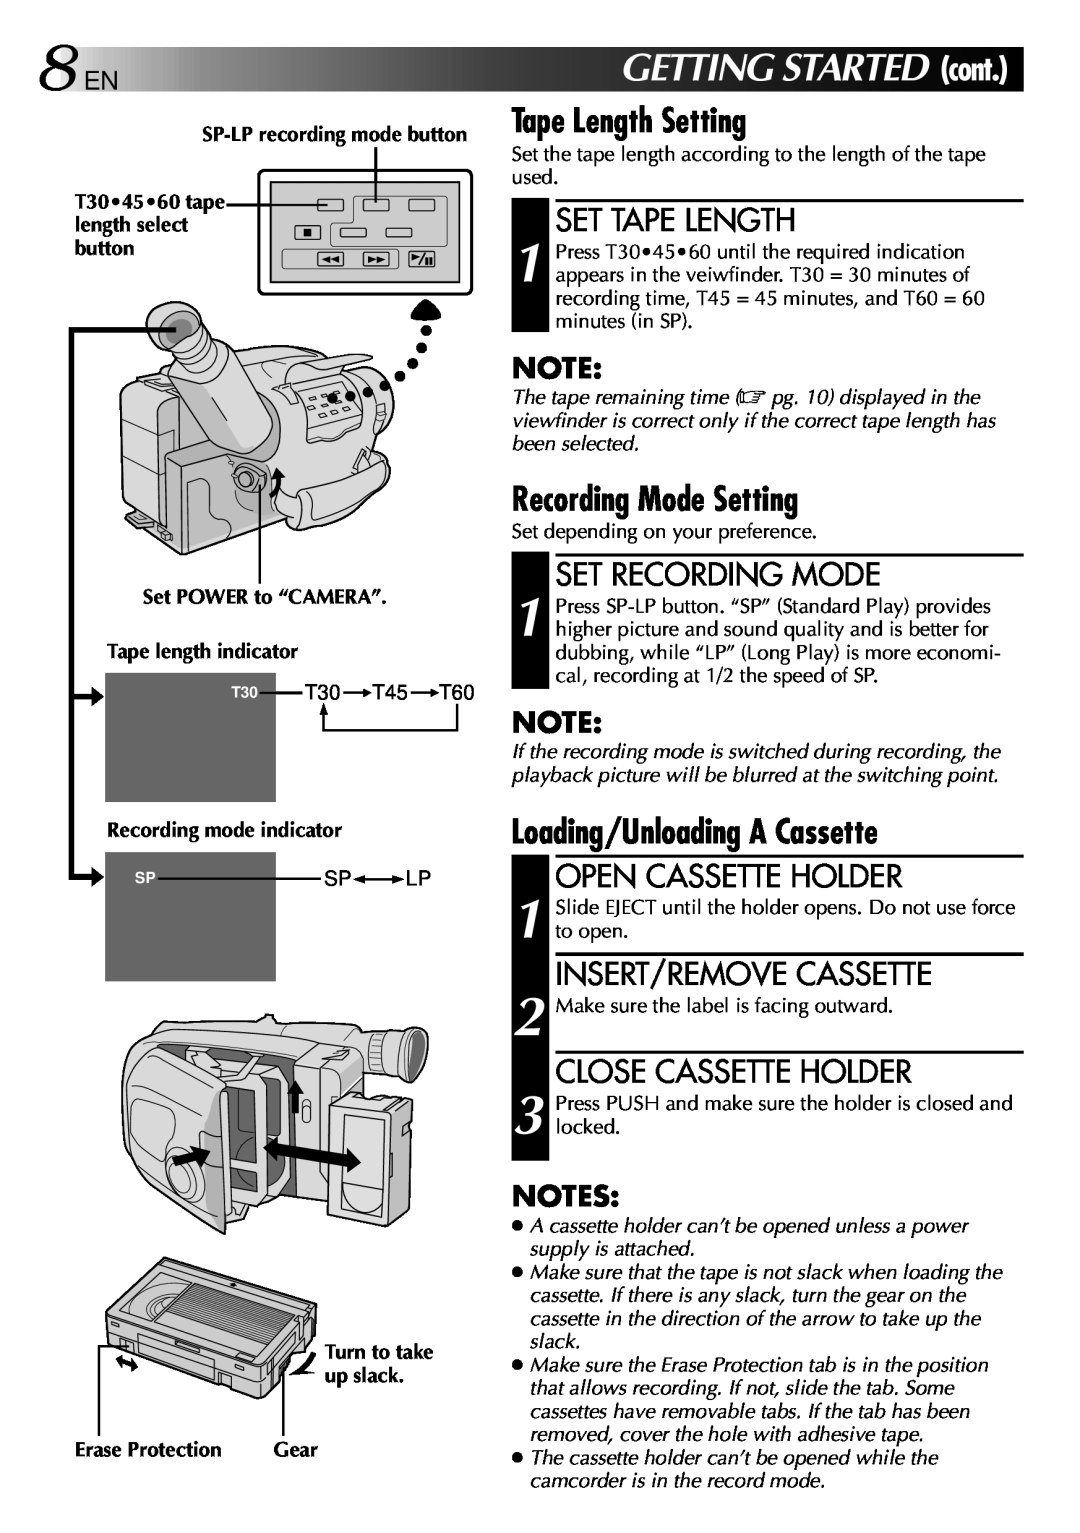 JVC LYT0002-082A GETTING STARTED cont, Tape Length Setting, Recording Mode Setting, Loading/Unloading A Cassette, button 